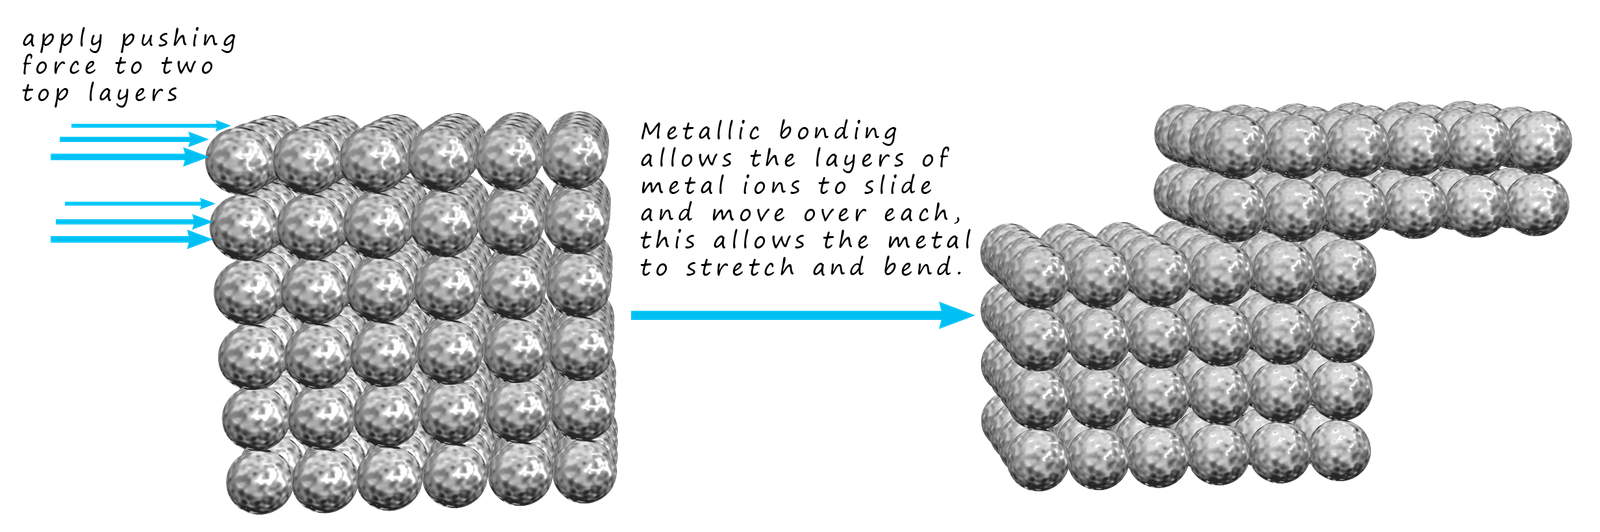 the ions present in a metal structure are able to slide over each other